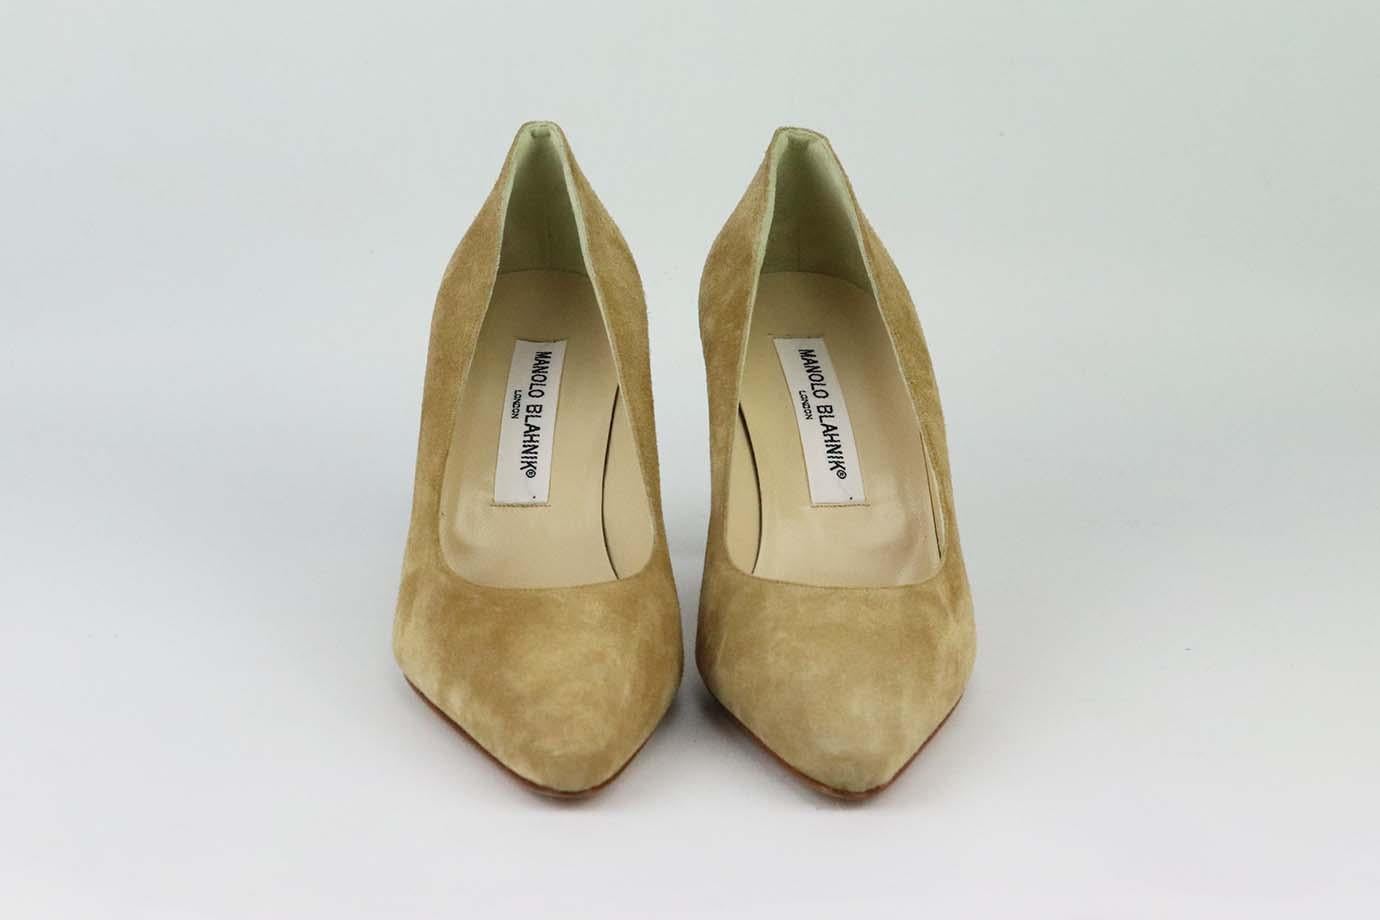 These pumps by Manolo Blahnik are a classic style that will never date, made in Italy from supple beige suede, they have pointed toes and comfortable 63 mm heels to take you from morning meetings to dinner with friends. Heel measures approximately